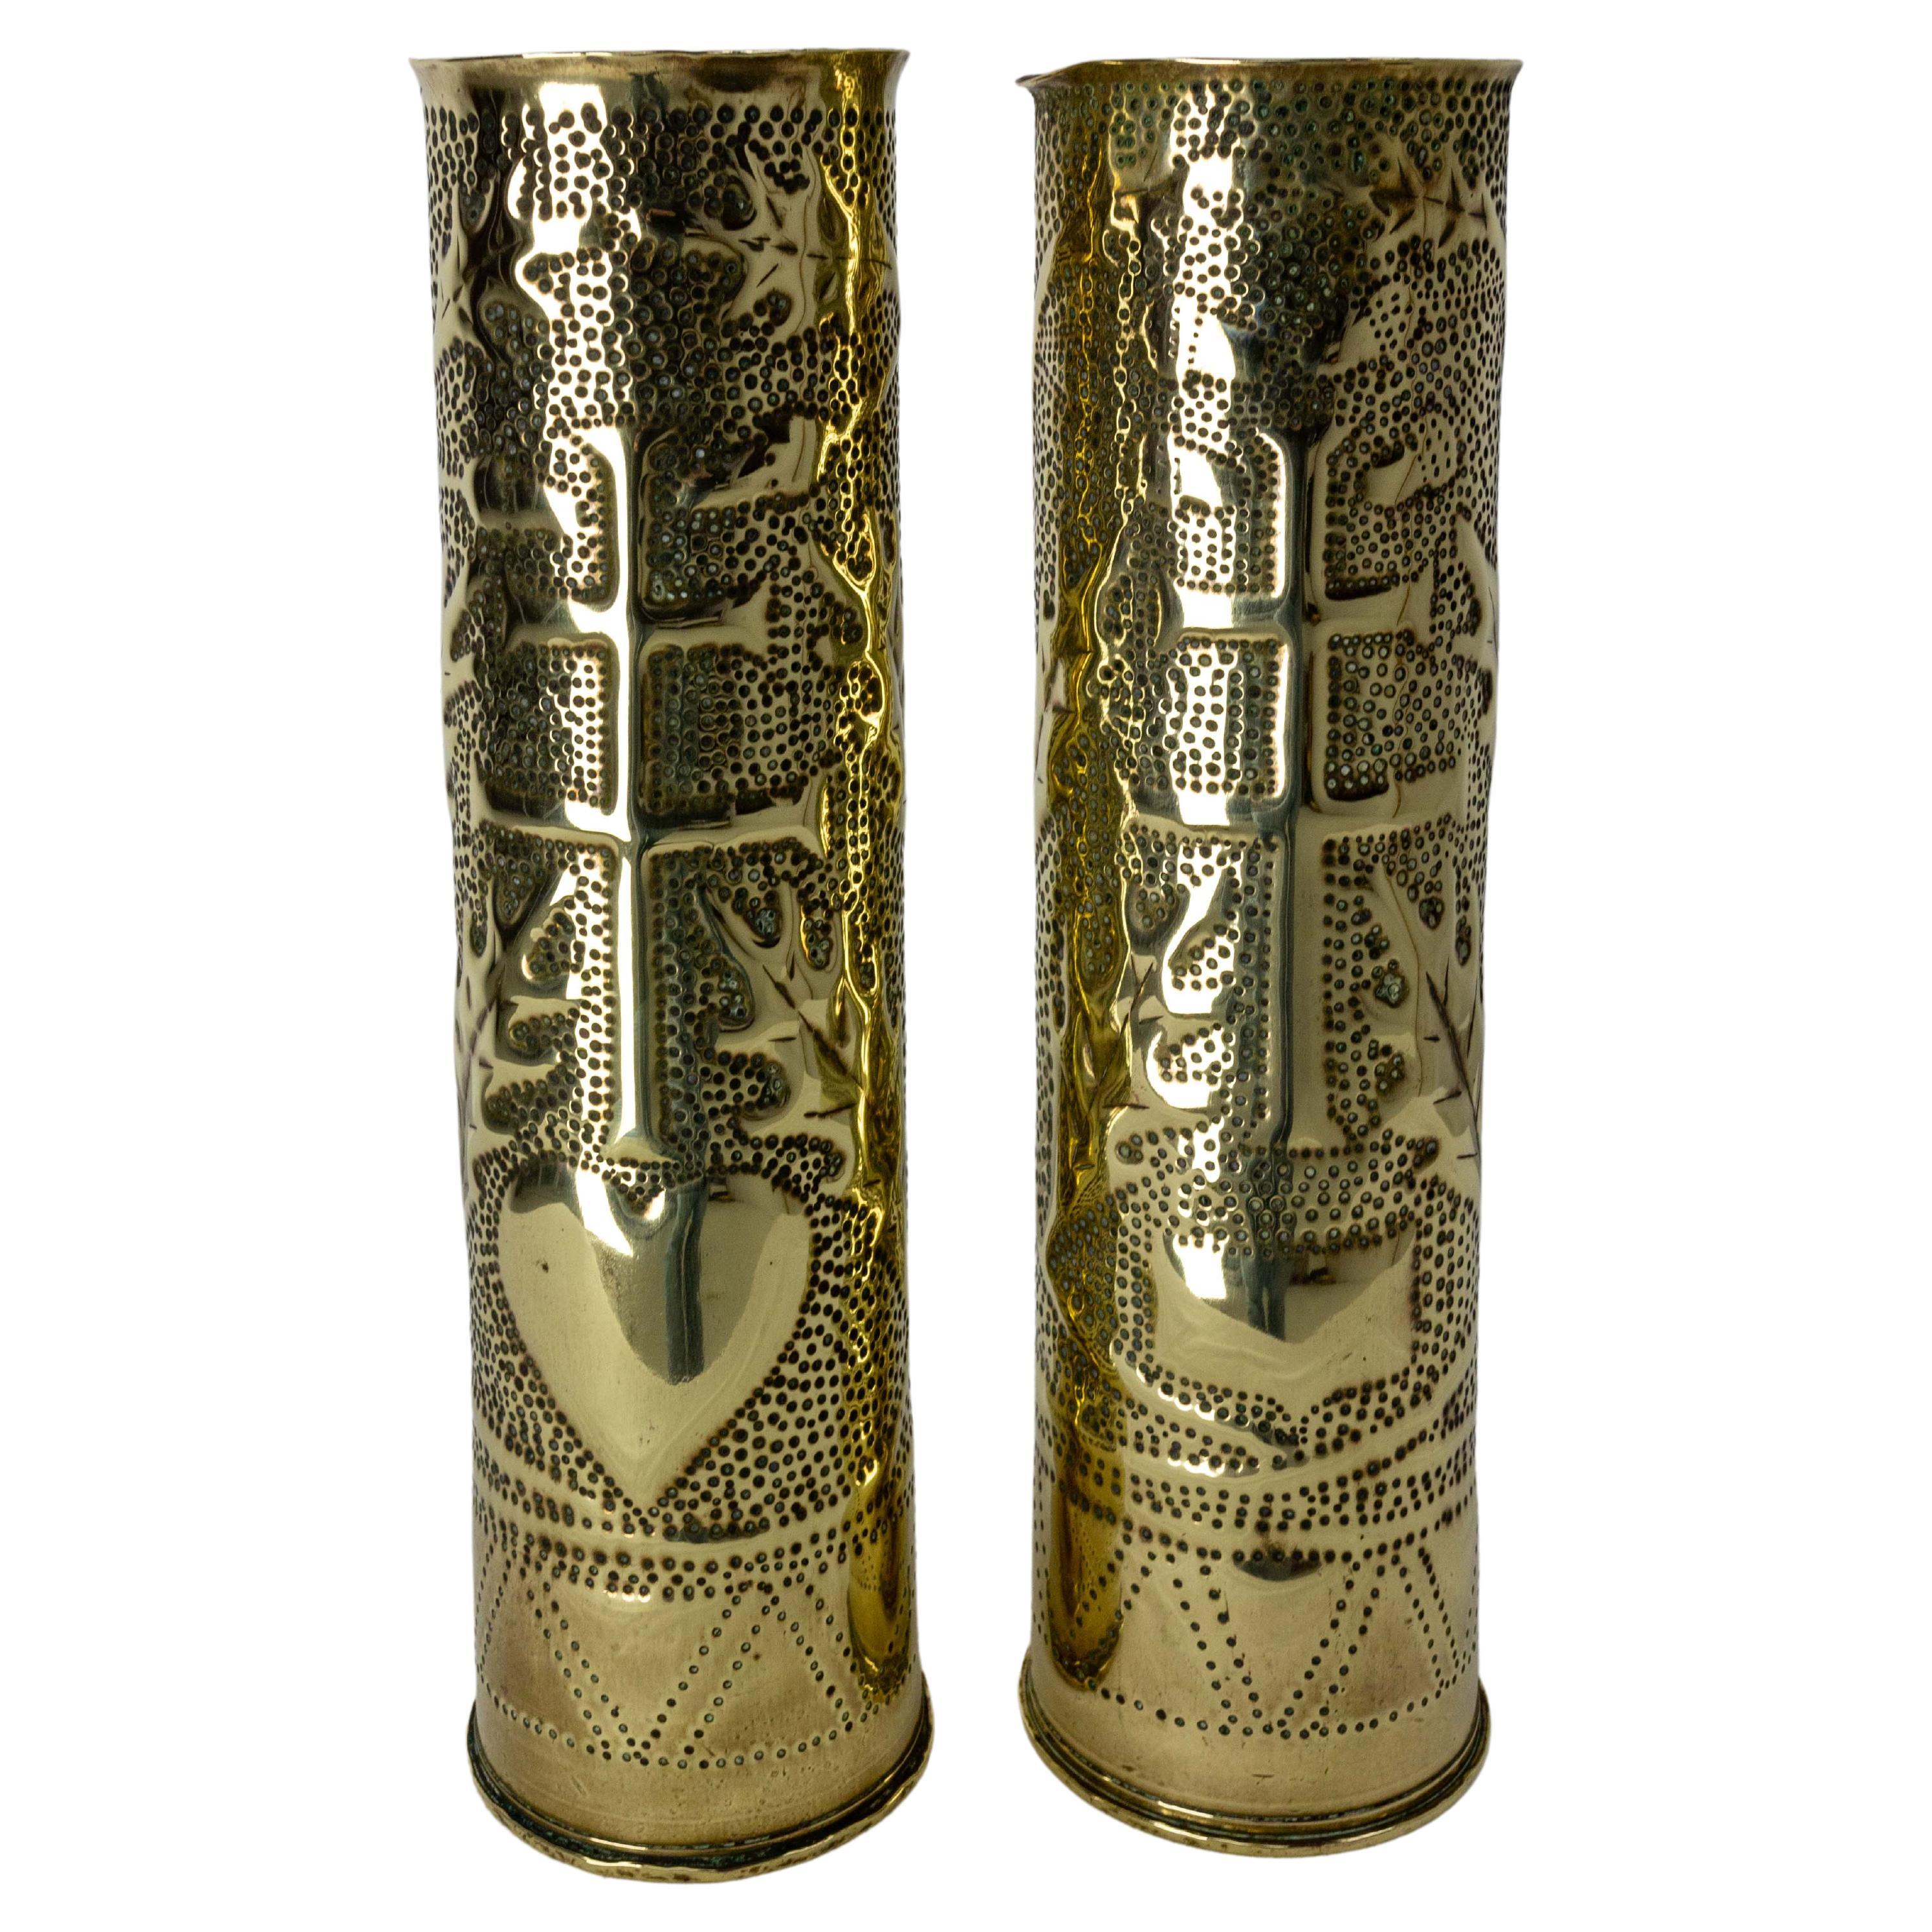 French Pair of World War I Brass Engraved Shell Casings Trench Artillery, French